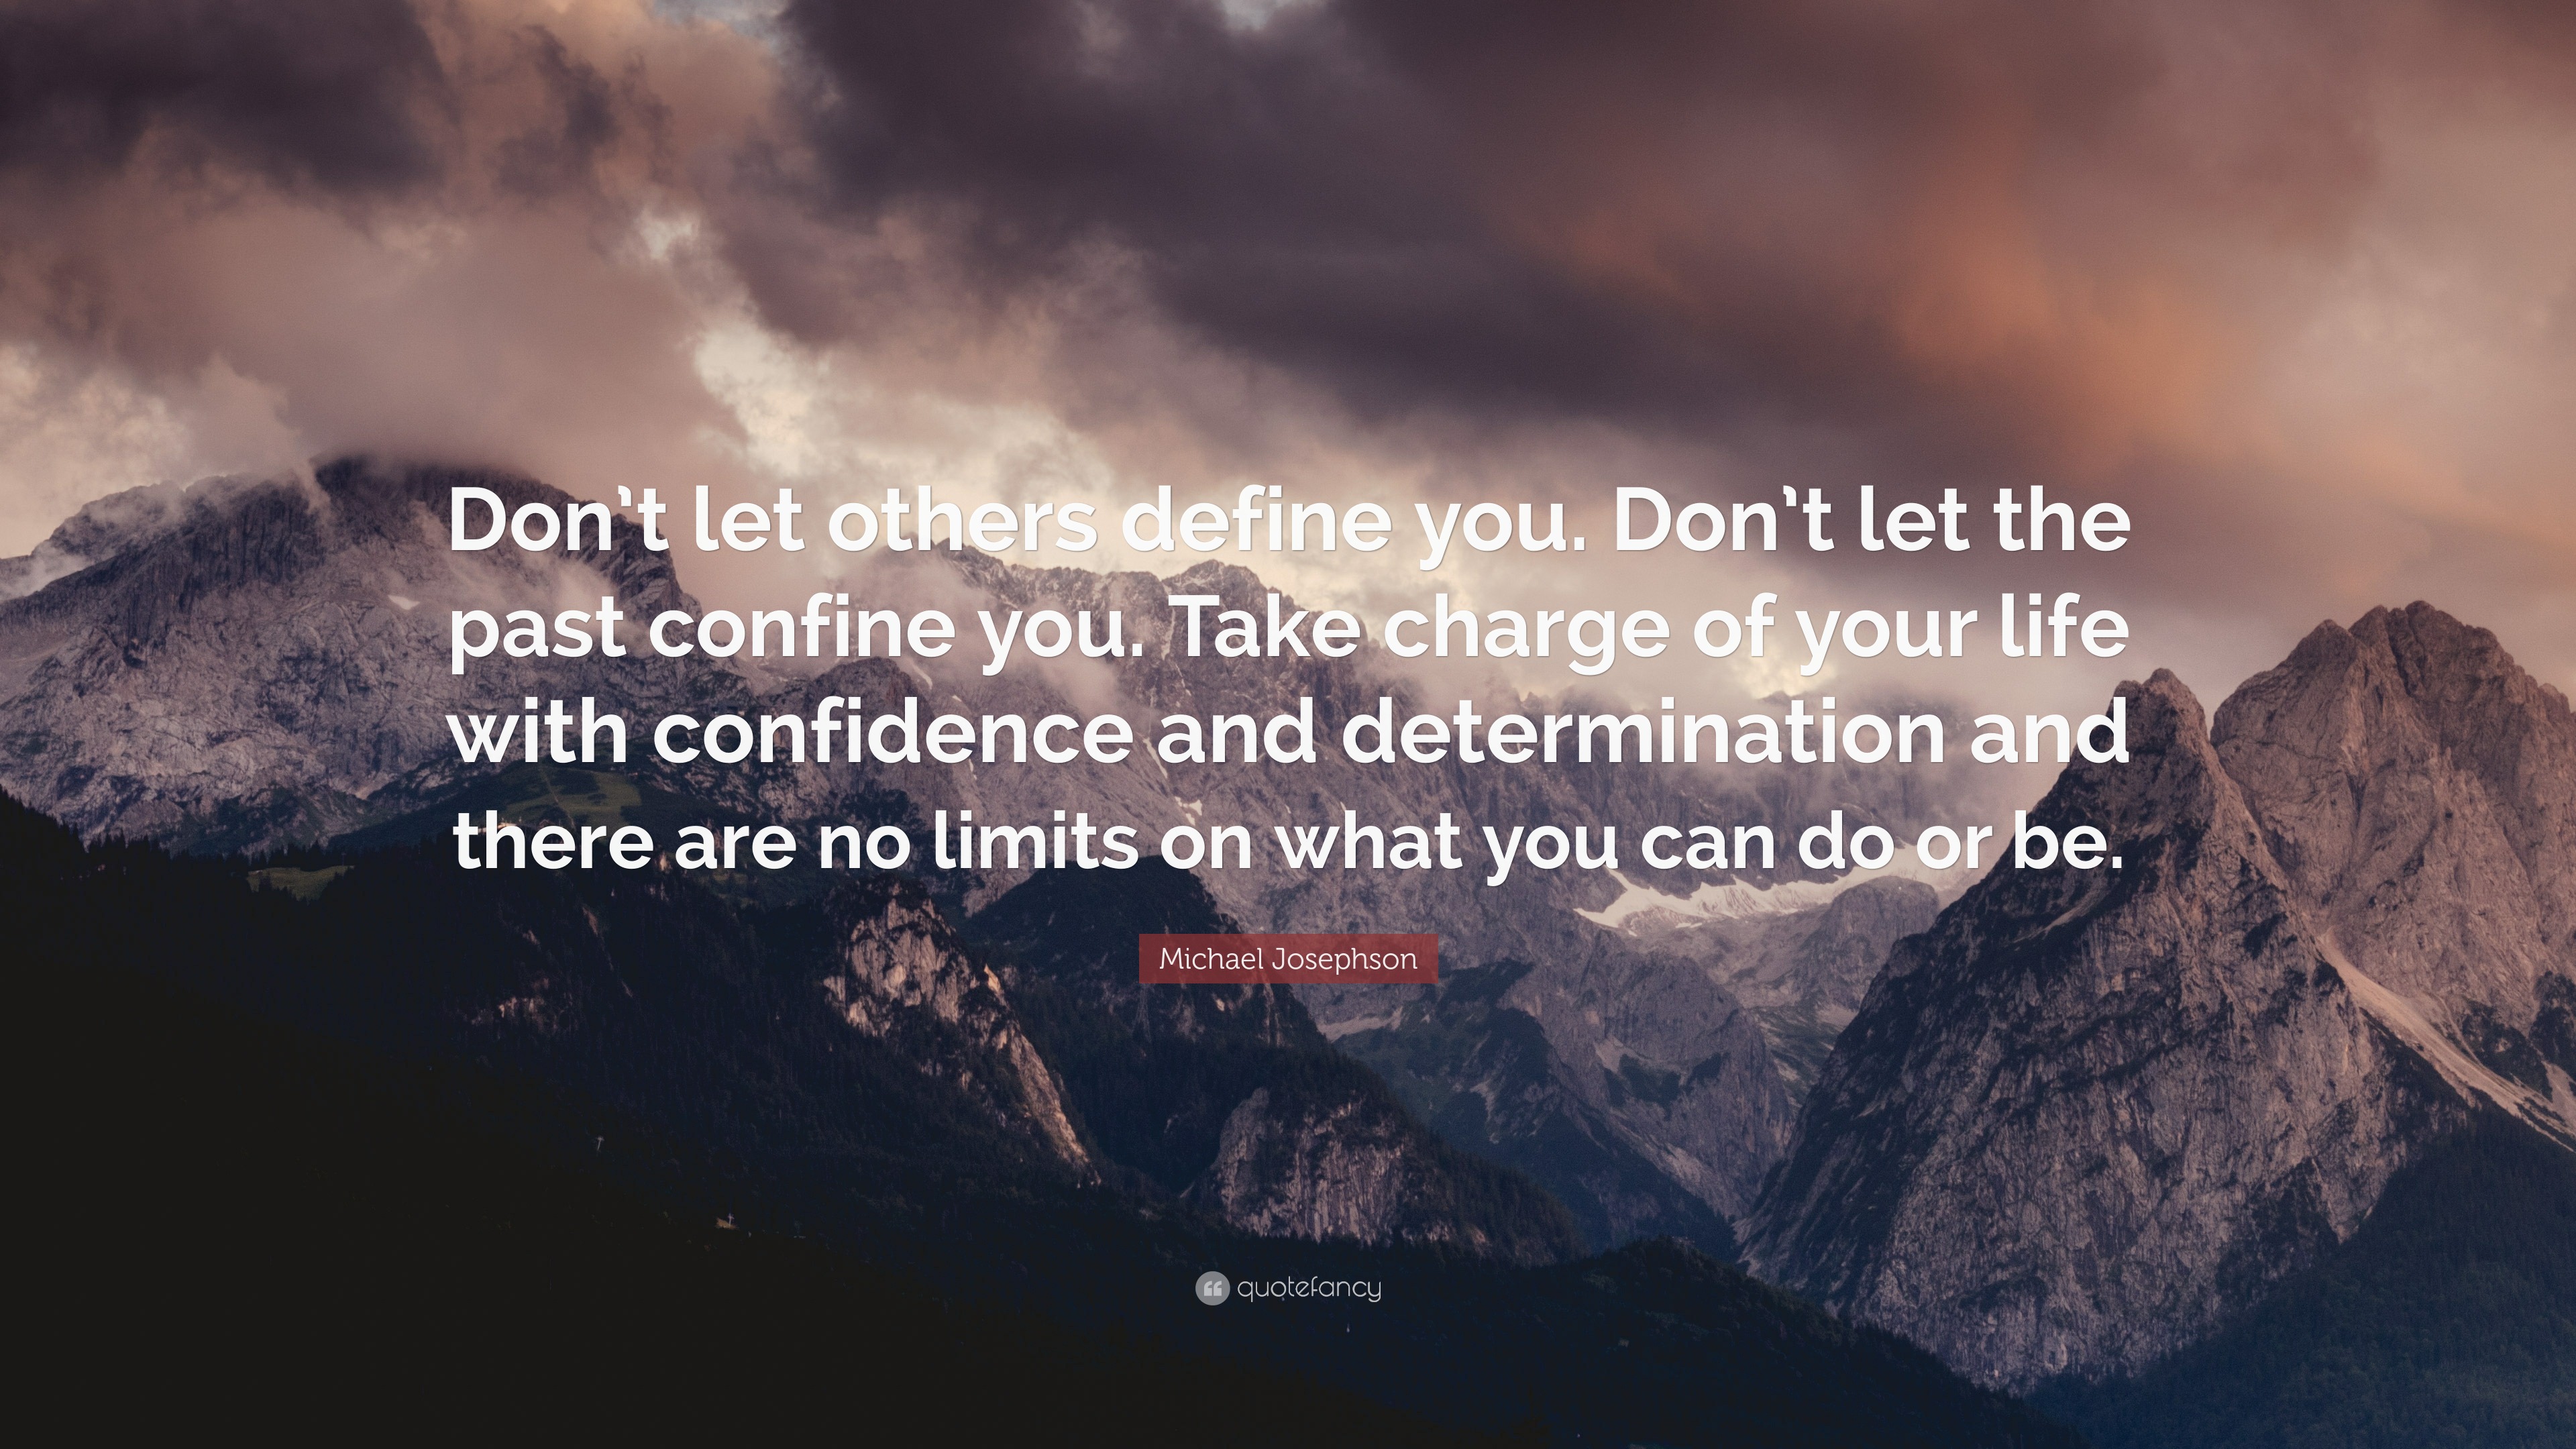 Michael Josephson Quote: “Don’t let others define you. Don’t let the